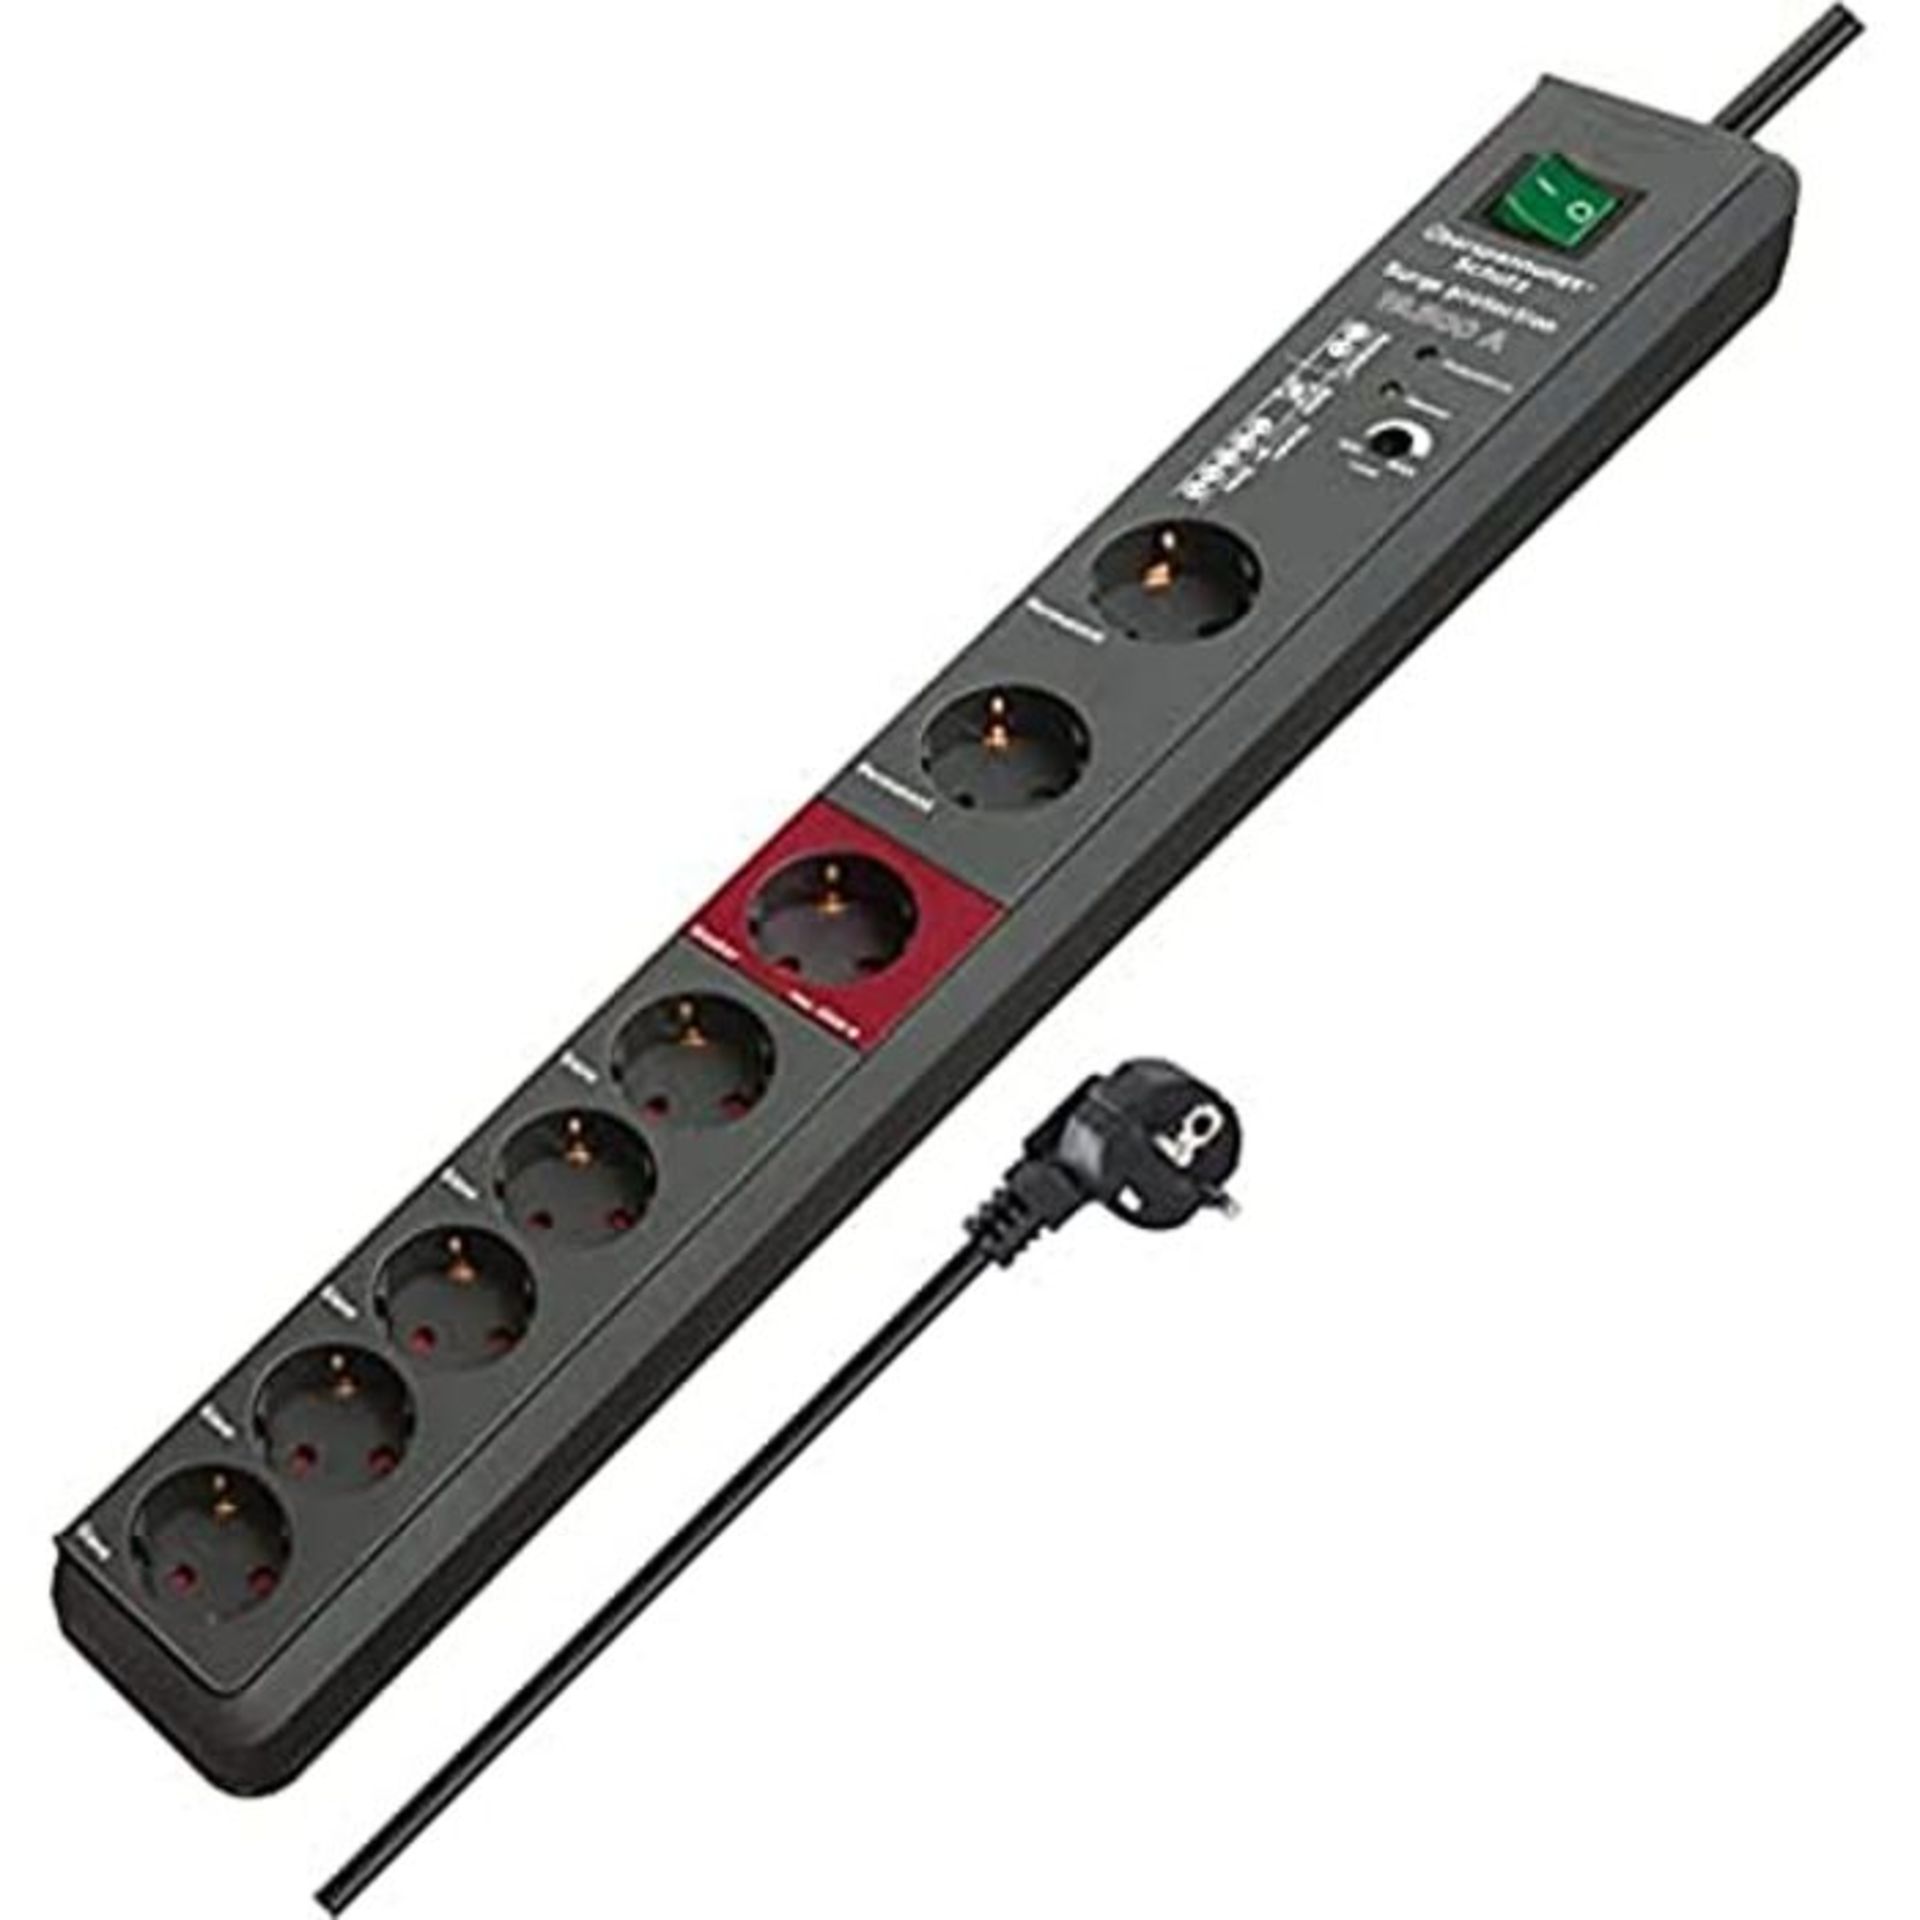 Brennenstuhl Secure-Tec, 6-pin power strip with surge protection and master/slave func